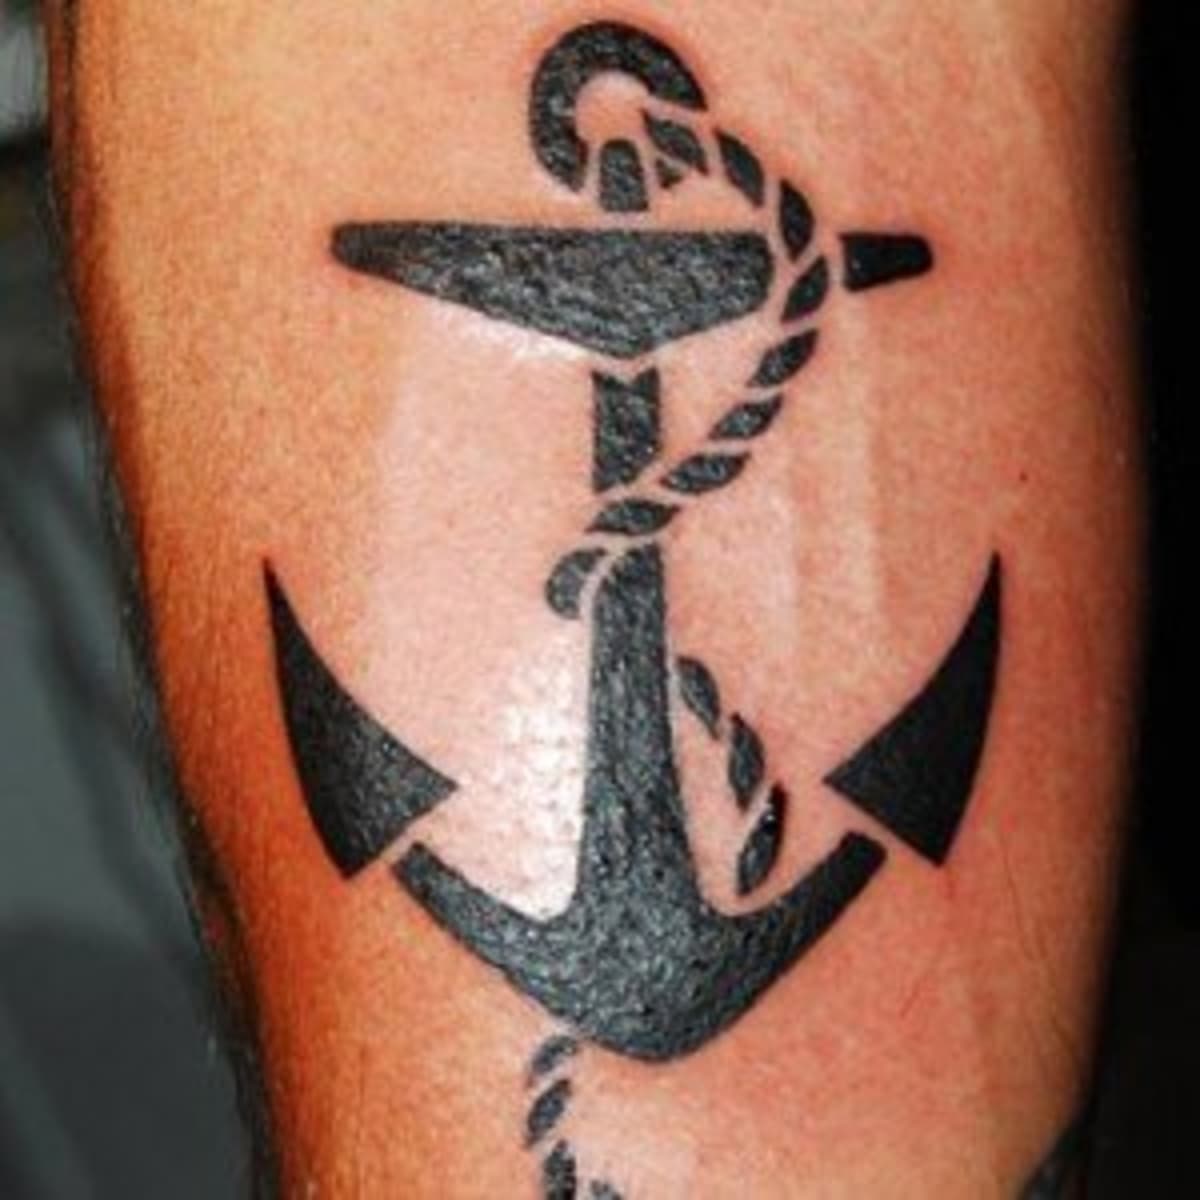 7 Creative Tattoo Ideas for Couples - Celebrity Ink